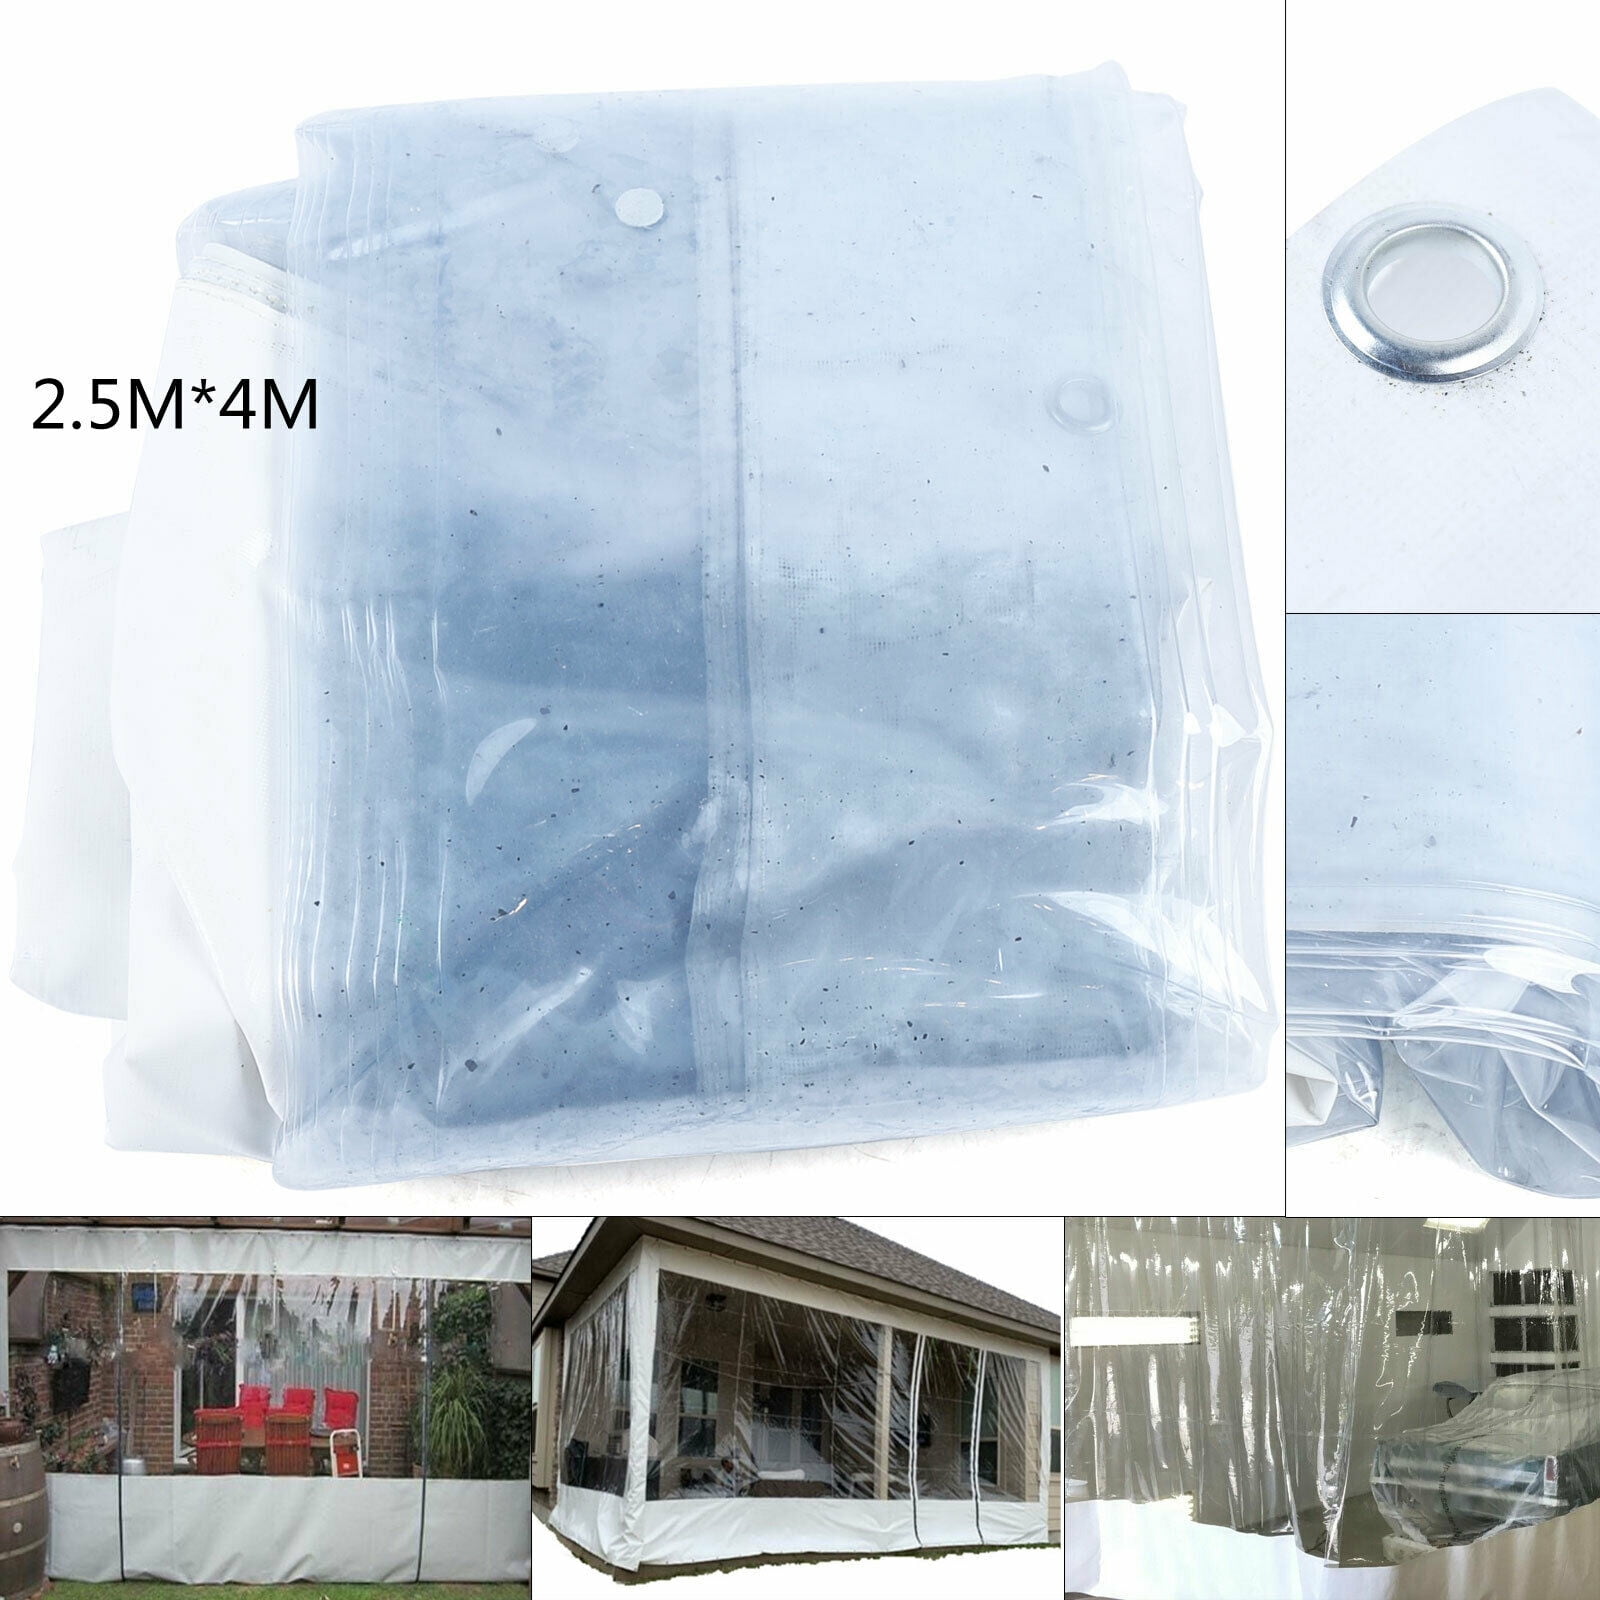 Waterproof Commercial Grade 0.5mm Vinyl Clear Awning Canopy Patio Enclosure 